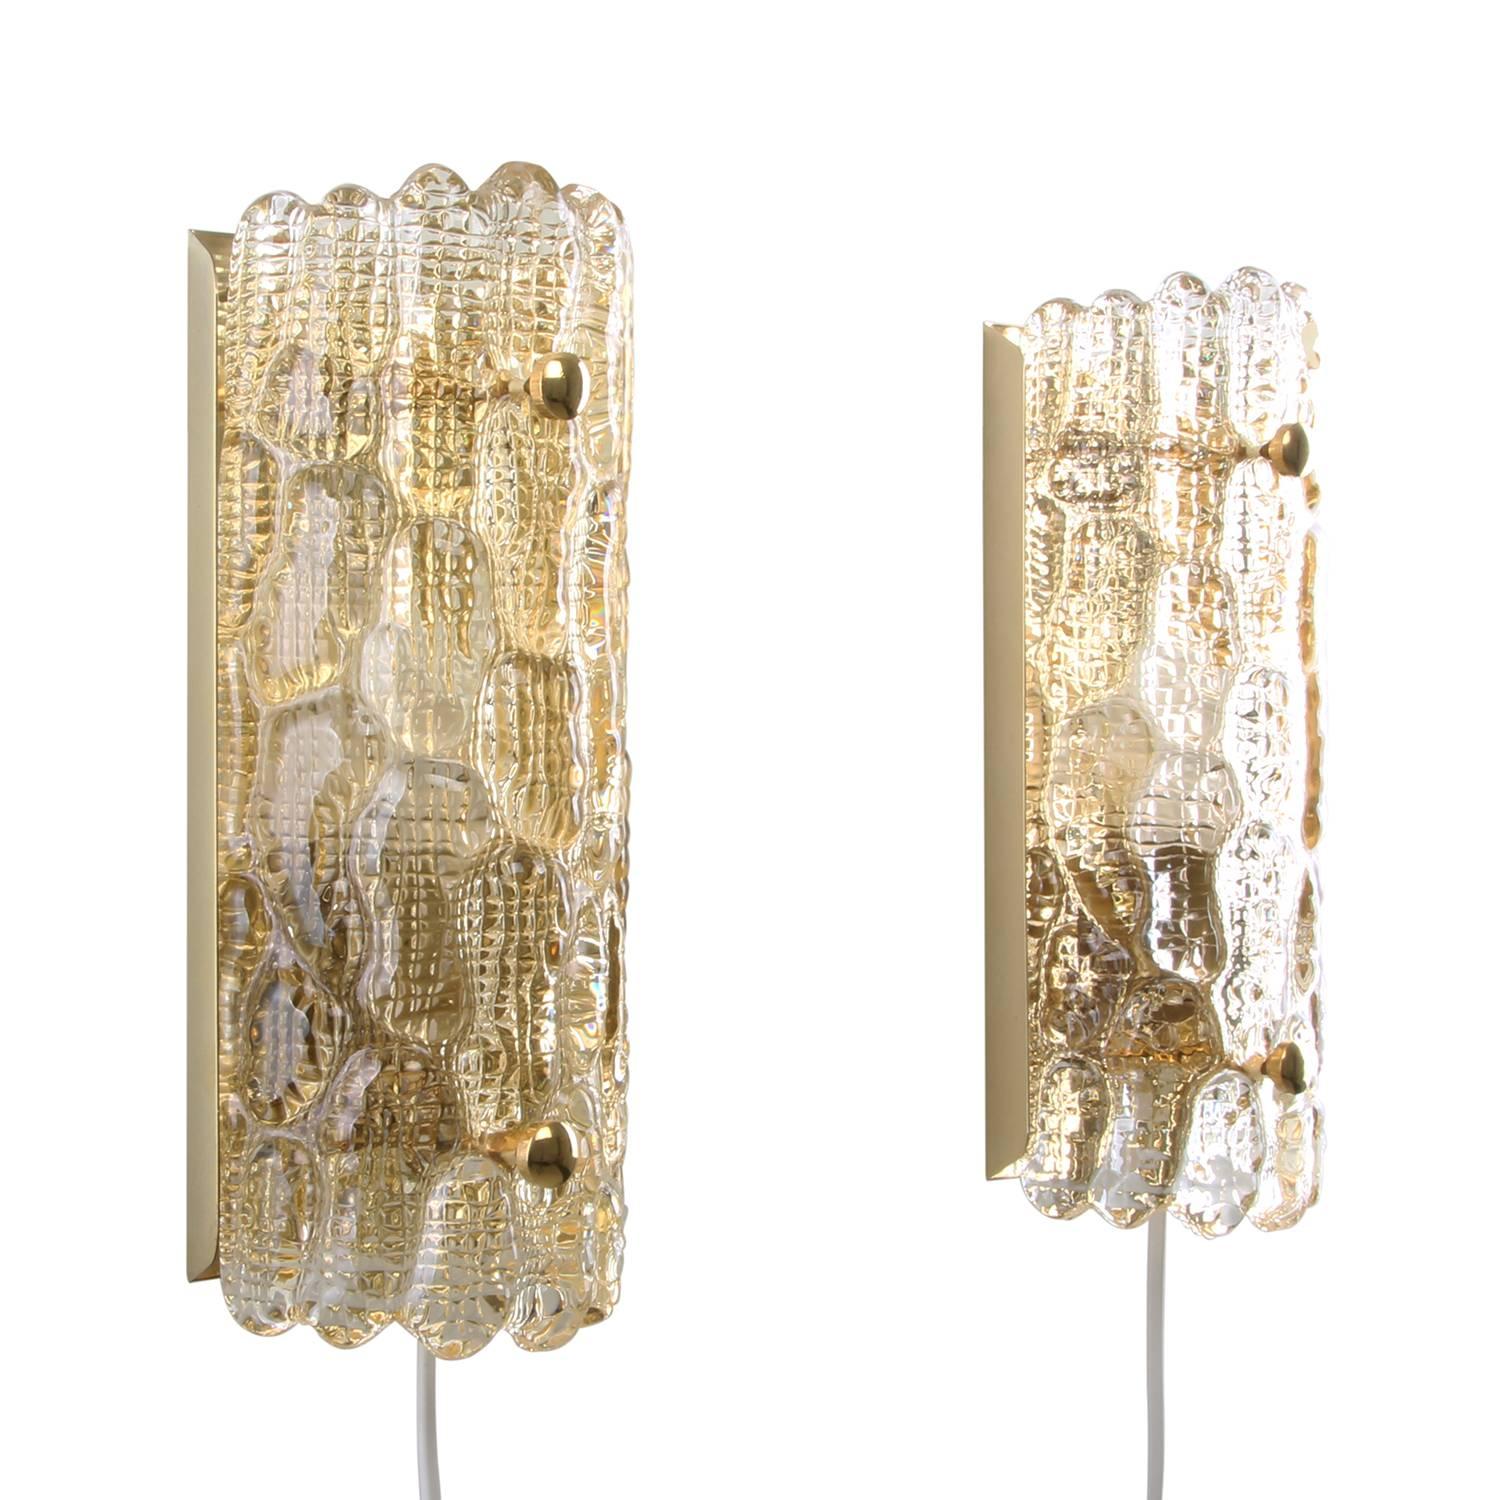 Scandinavian Modern Gefion Sconces 'Pair', Crystal Glass Wall Lights by Lyfa/Orrefors, 1960s For Sale